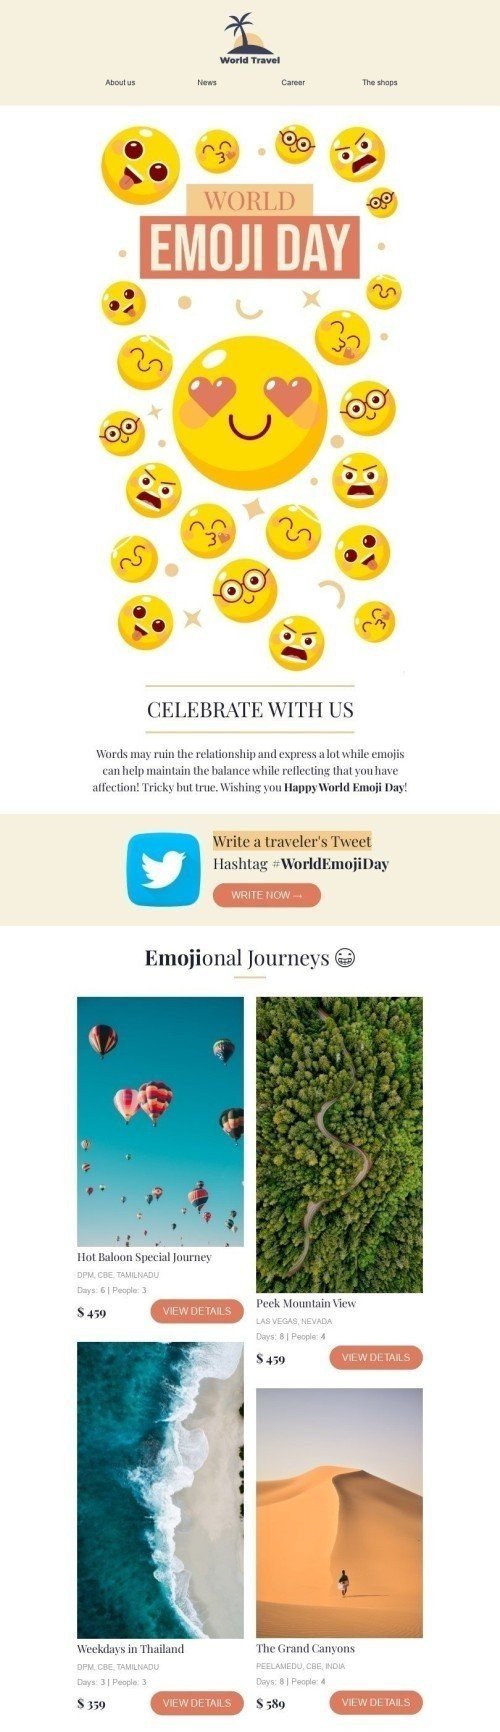 World Emoji Day Email Template "Write a traveler's Tweet" for Travel industry desktop view